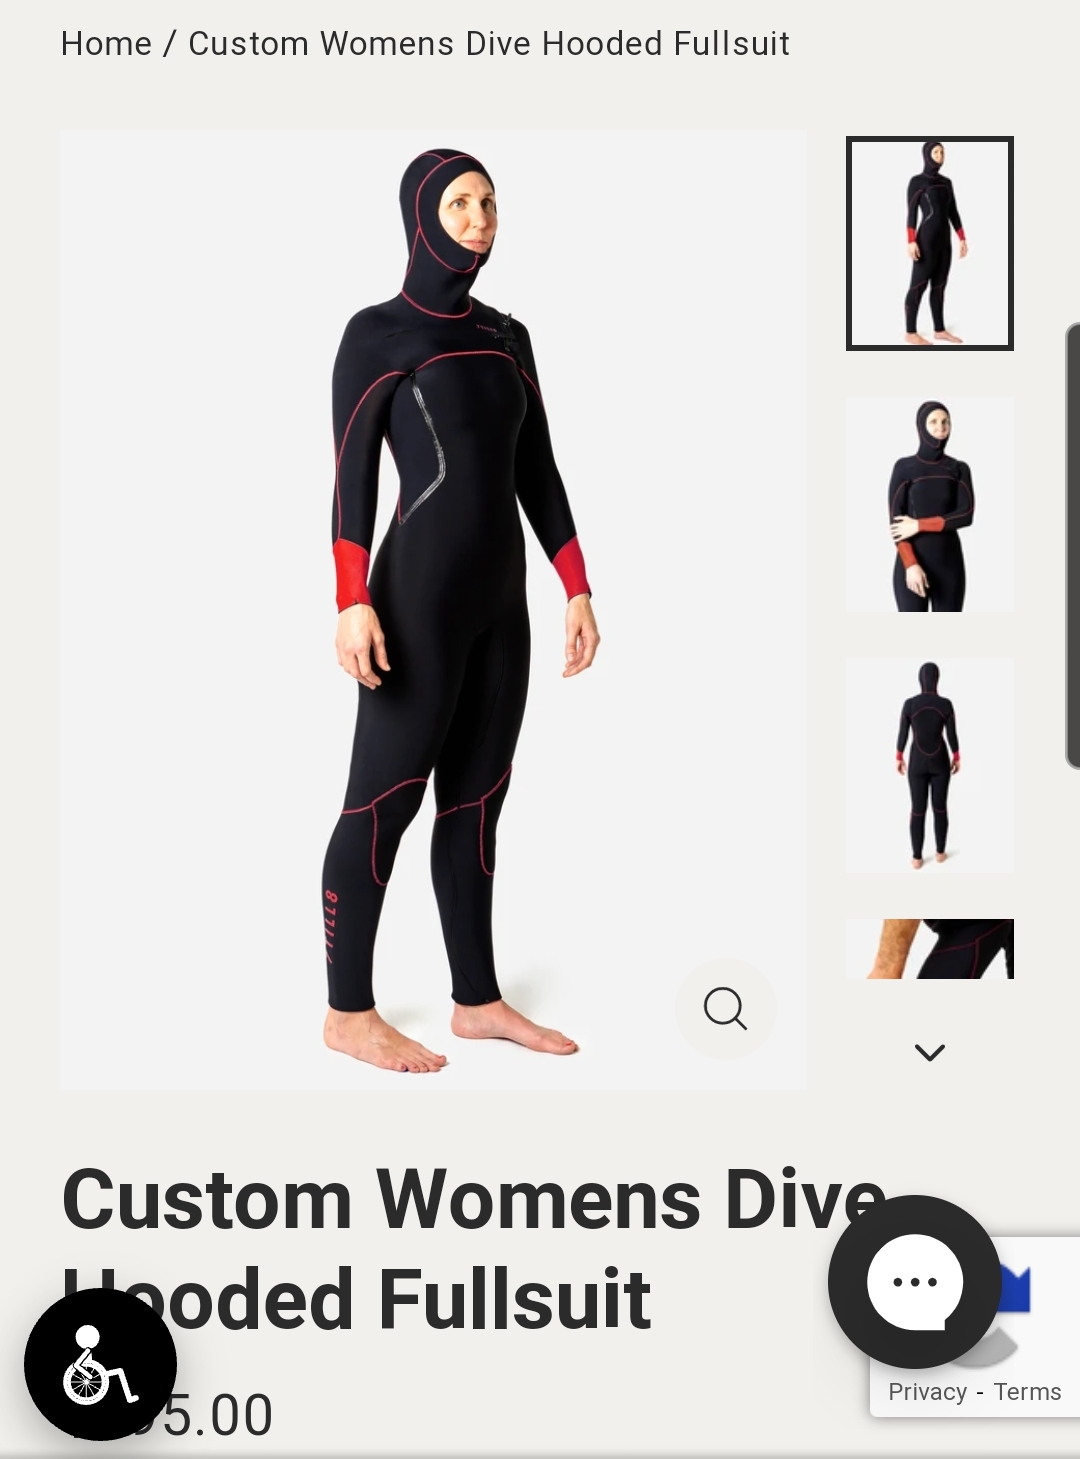 Wetsuit covering head to toe